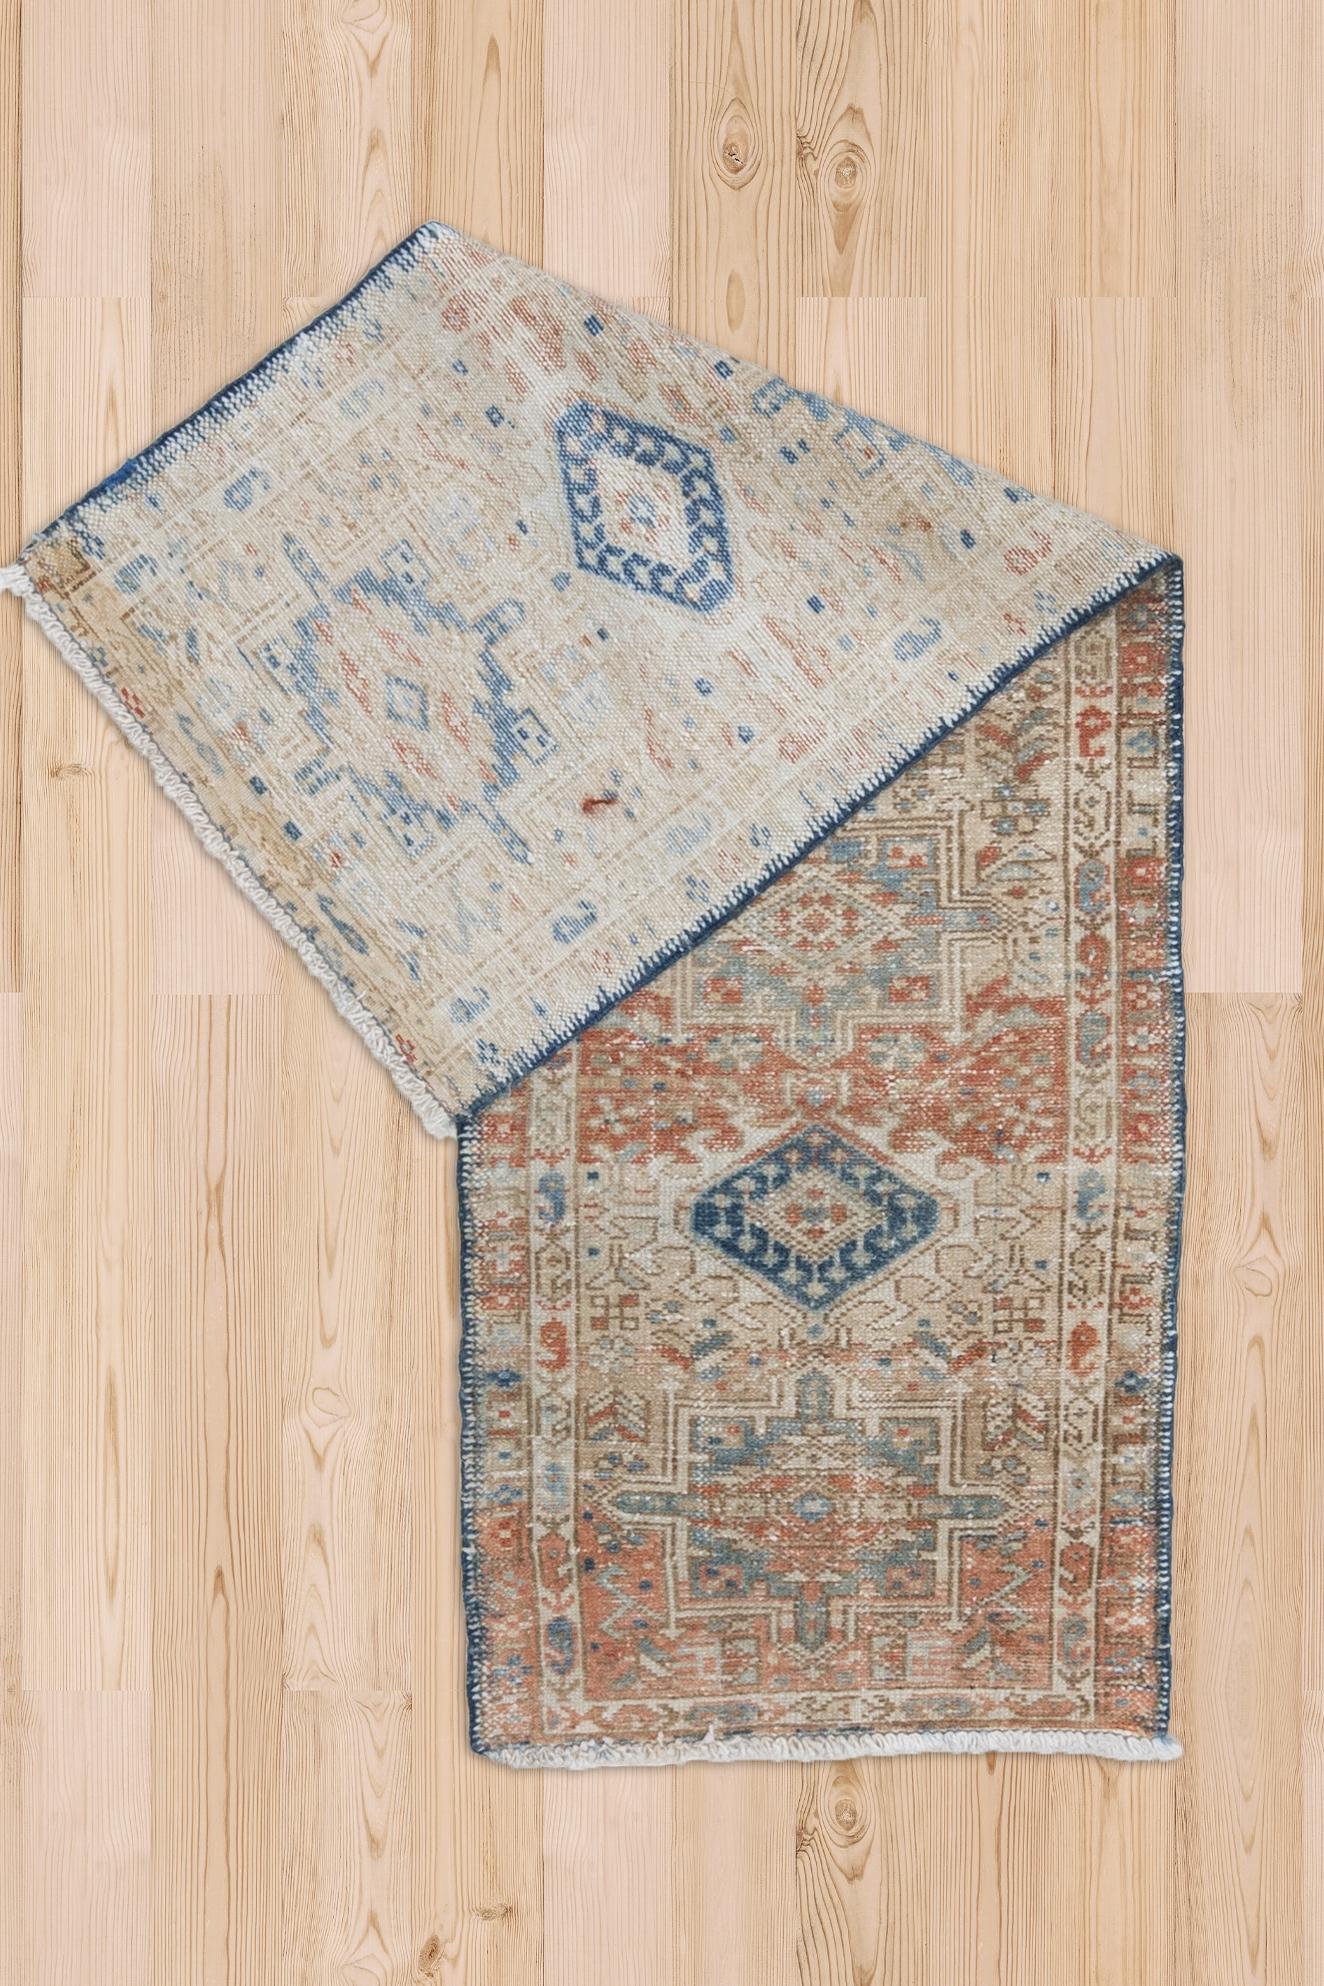 Age: Circa 1930

Colors: ivory, cerulean blue, ginger, soft scarlet red

Pile: low

Wear Notes: 5

Material: Wool on Cotton. 


Woven in the early 20th century, this antique Persian Karaja features the highly recognizable Karaja symbols of crabs and